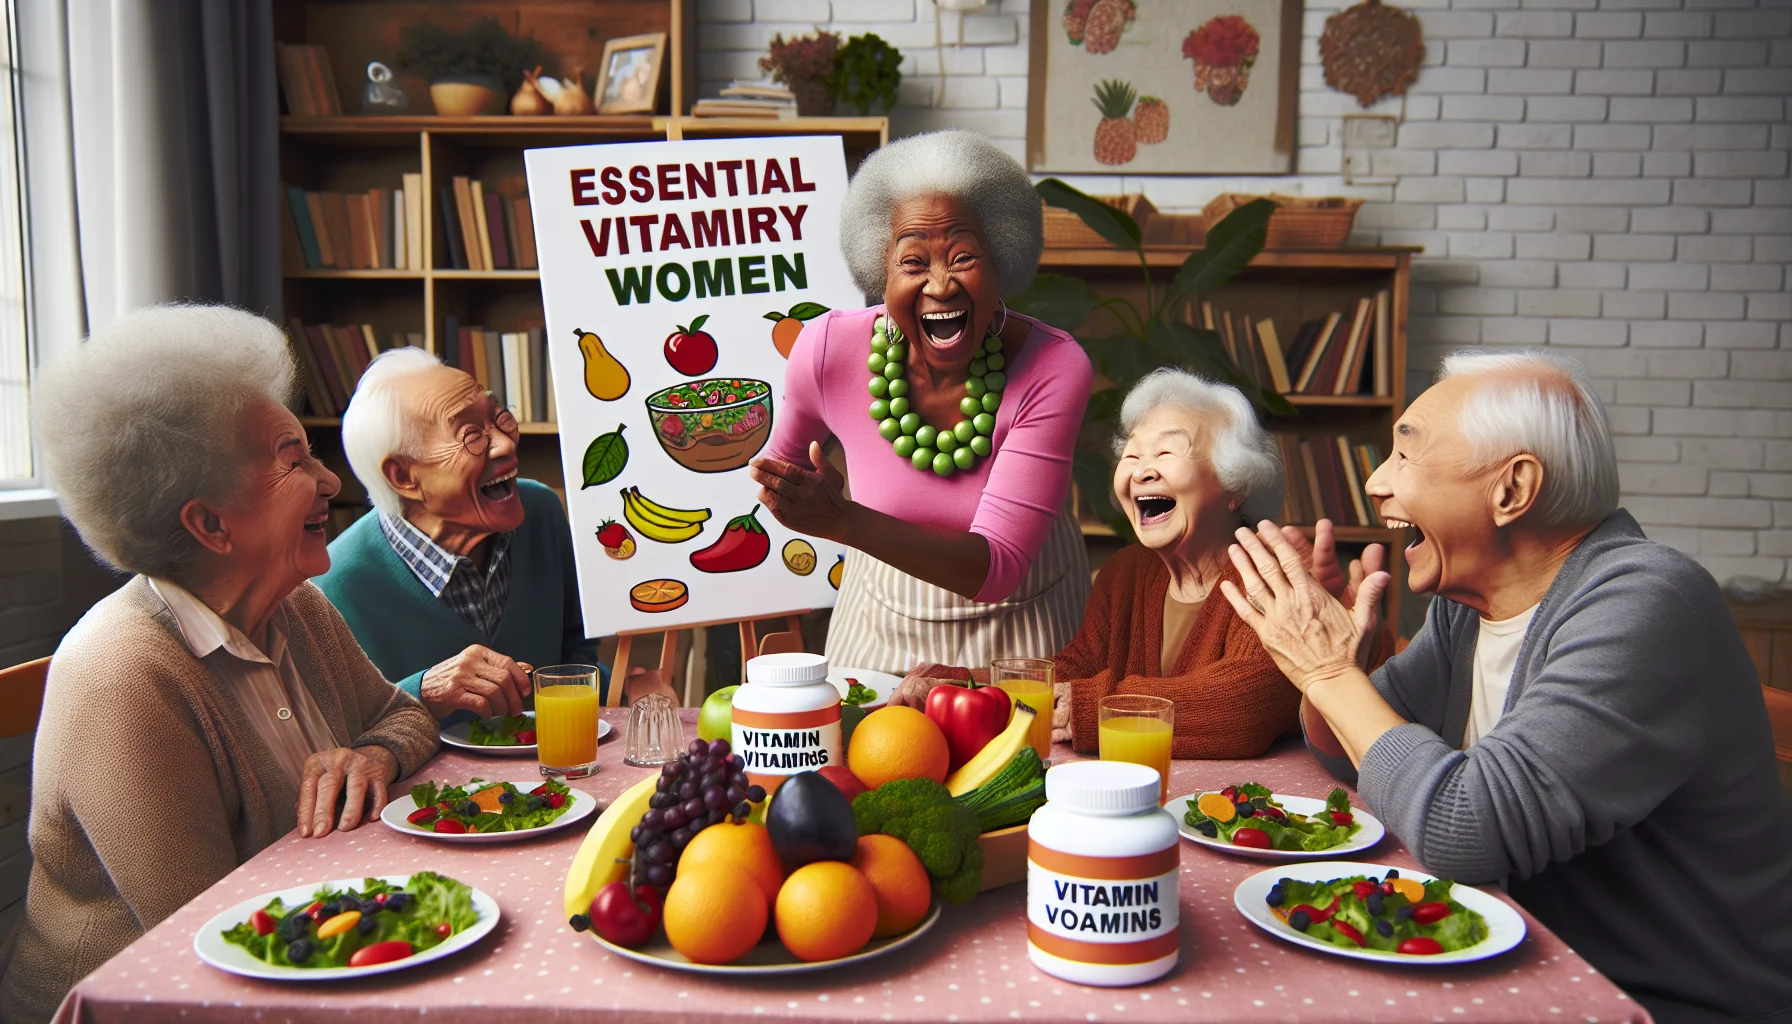 Create a humoristic and real-life based image showcasing essential vitamins for elderly women. Envision an engaging scene set in a lively community cookbook club that caters to seniors. Picture an African elderly woman animatedly explaining a recipe for a vitamin-rich salad to her intrigued onlookers: an Asian elderly man and a Caucasian elderly woman. The room is filled with plates of vibrant, colourful fruits and vegetables, vitamin bottles shaped like different fruits, and health-conscious cookbooks specifically targeting the dietary needs of seniors. Everyone in the room are releasing hearty laughter, turning an otherwise mundane topic into a fun social gathering.